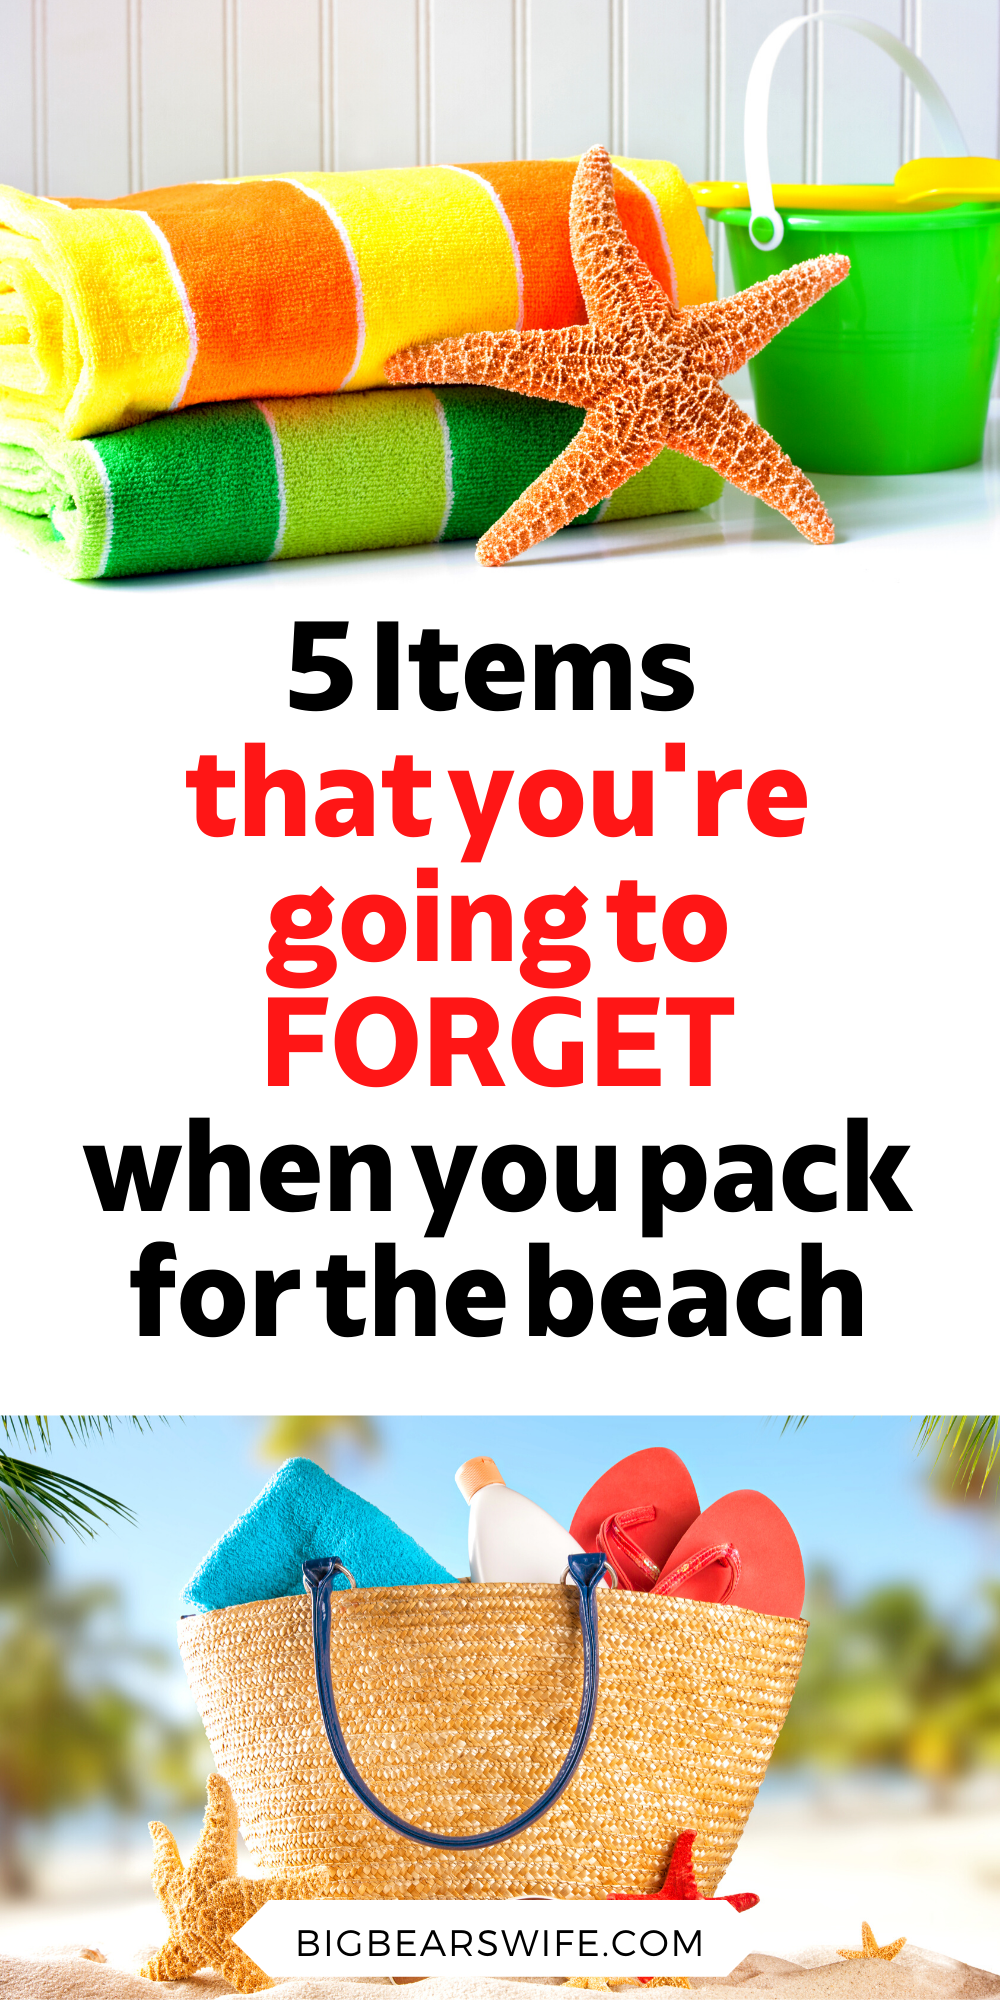 Are you wondering what to pack for the beach? Worried that you're going to forget something? Here are 5 Items that You're going to forget when you pack for the beach! via @bigbearswife